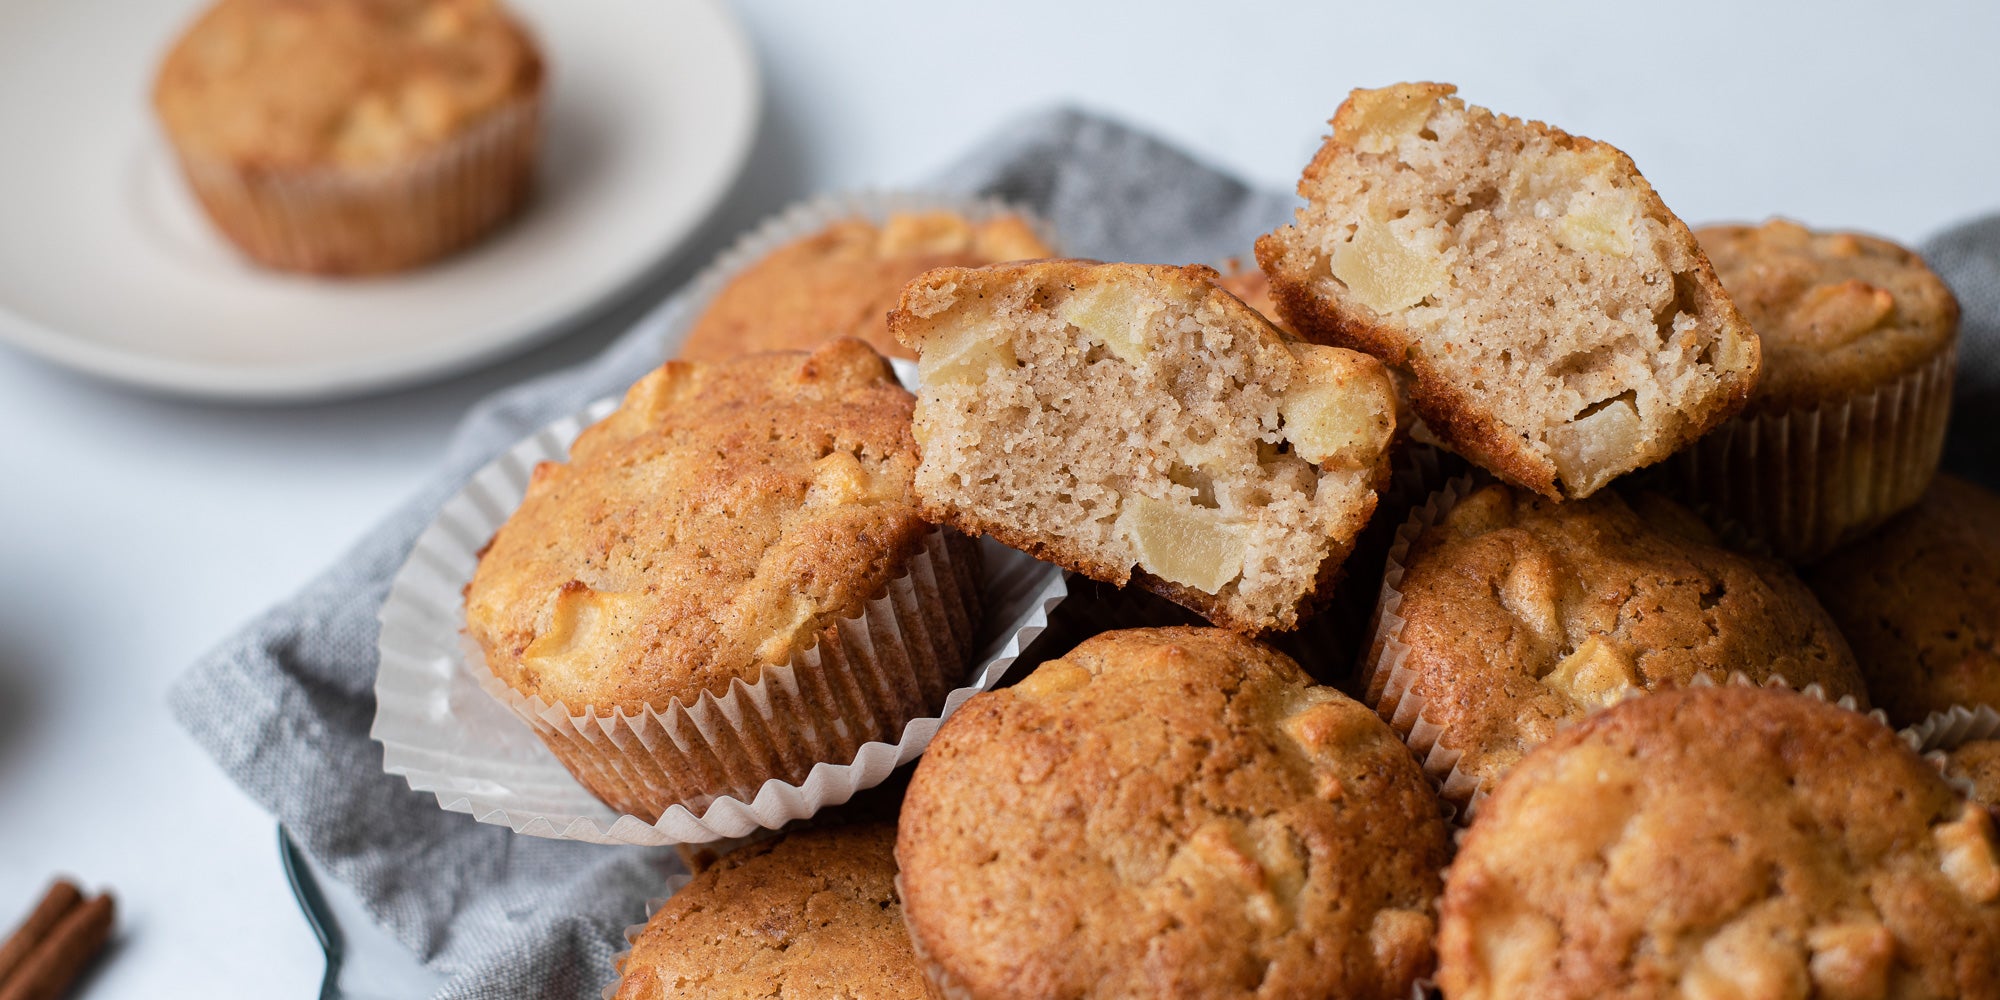 A stack of Calorie Conscious Apple & Cinnamon Muffins, cut open showing the inside of the bake